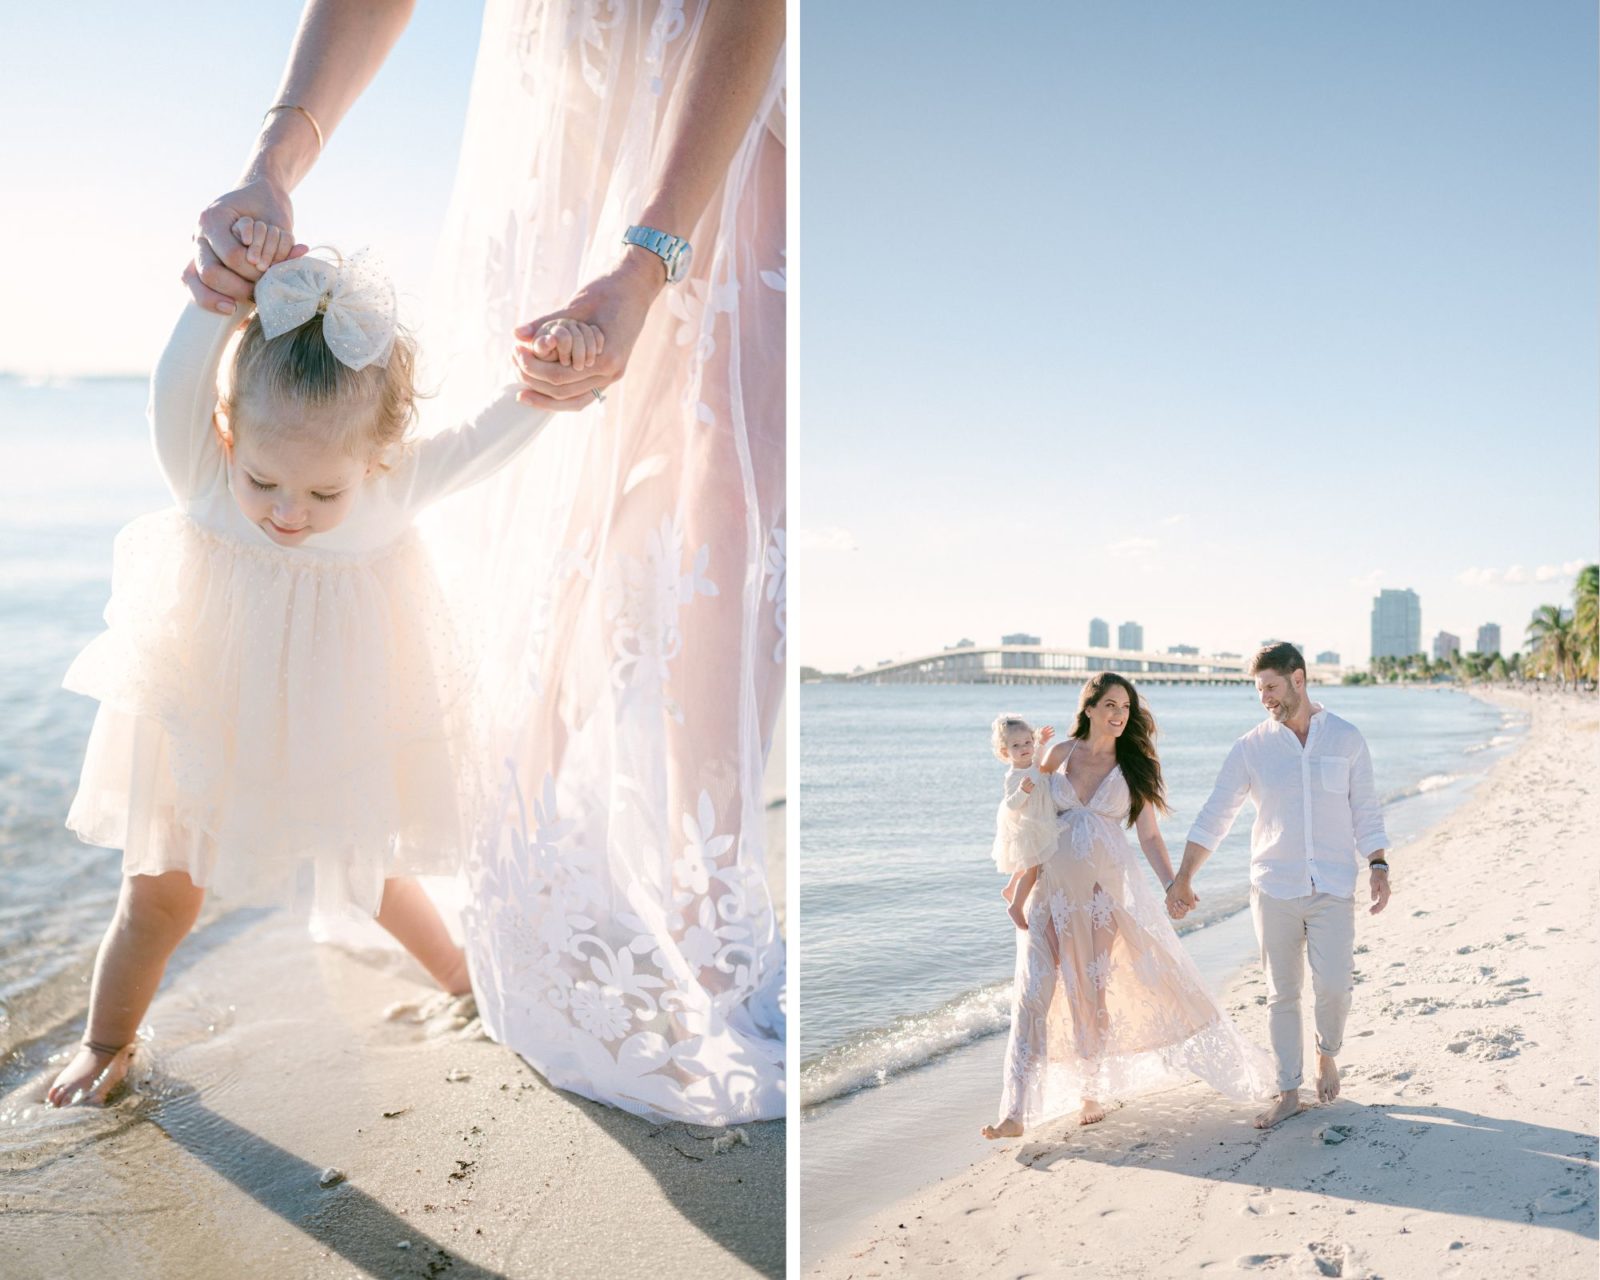 Maternity photos in Key Biscayne